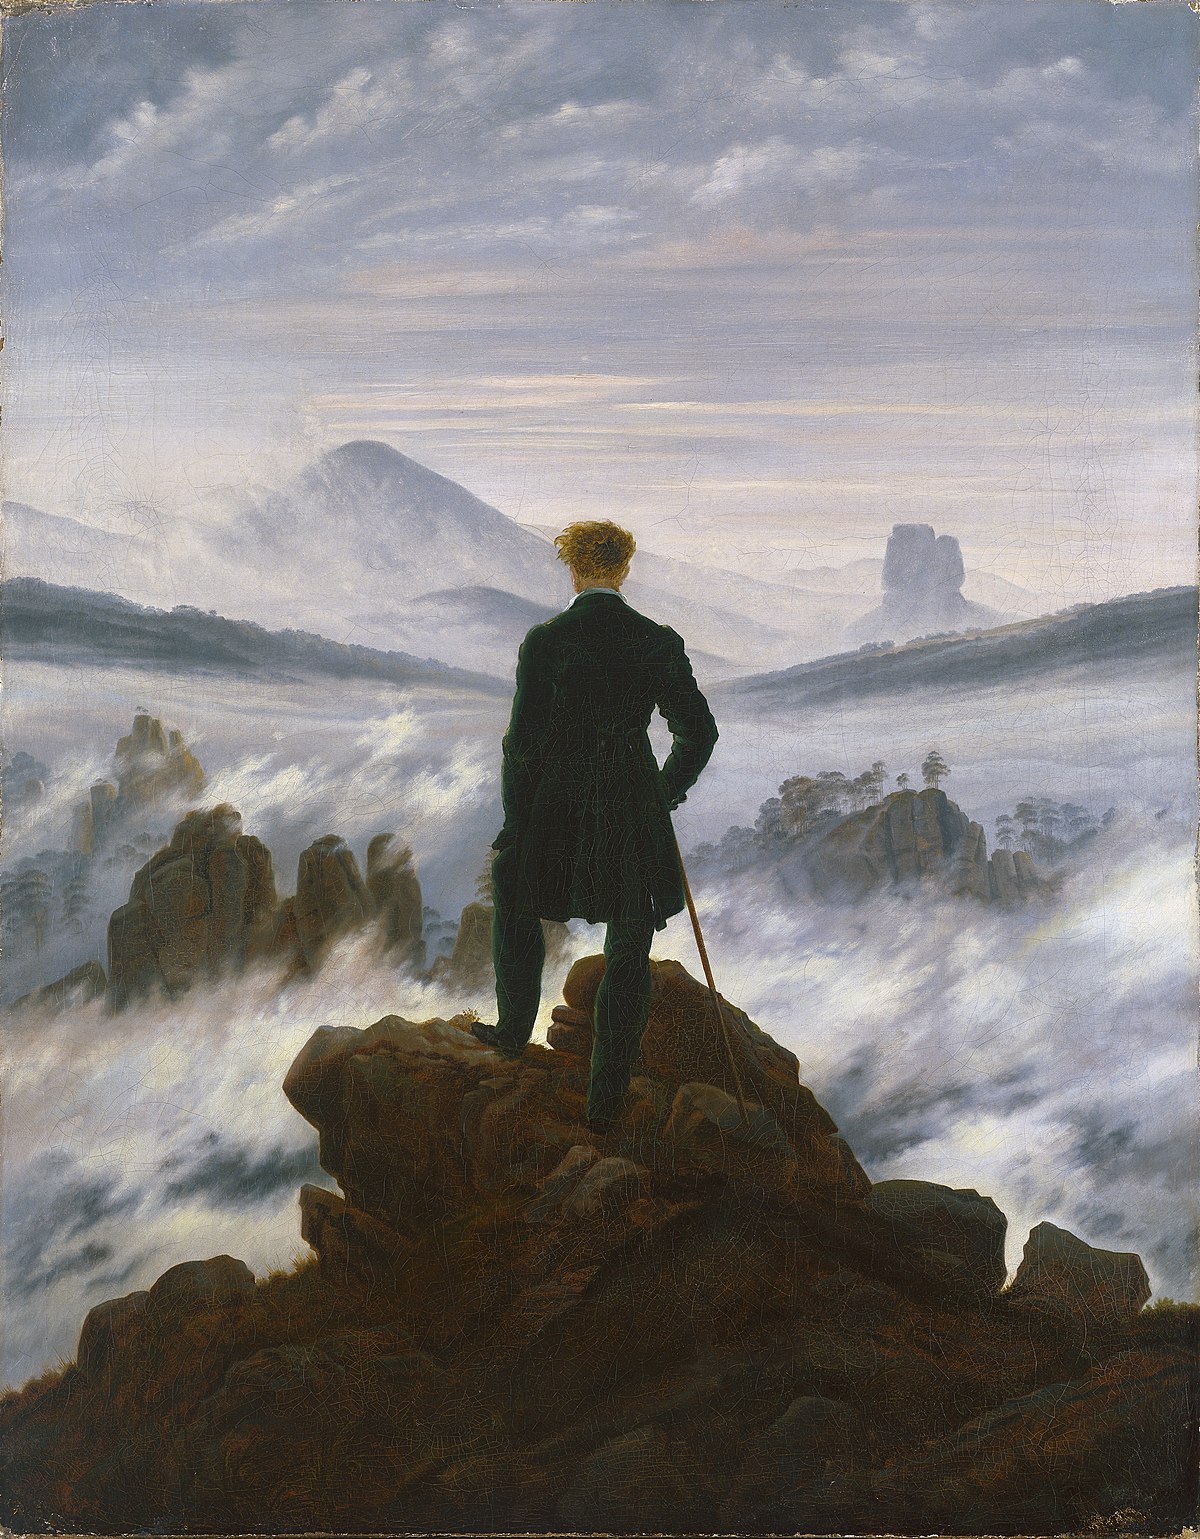 A person standing on the edge of a cliff, contemplating whether to jump into the water below.